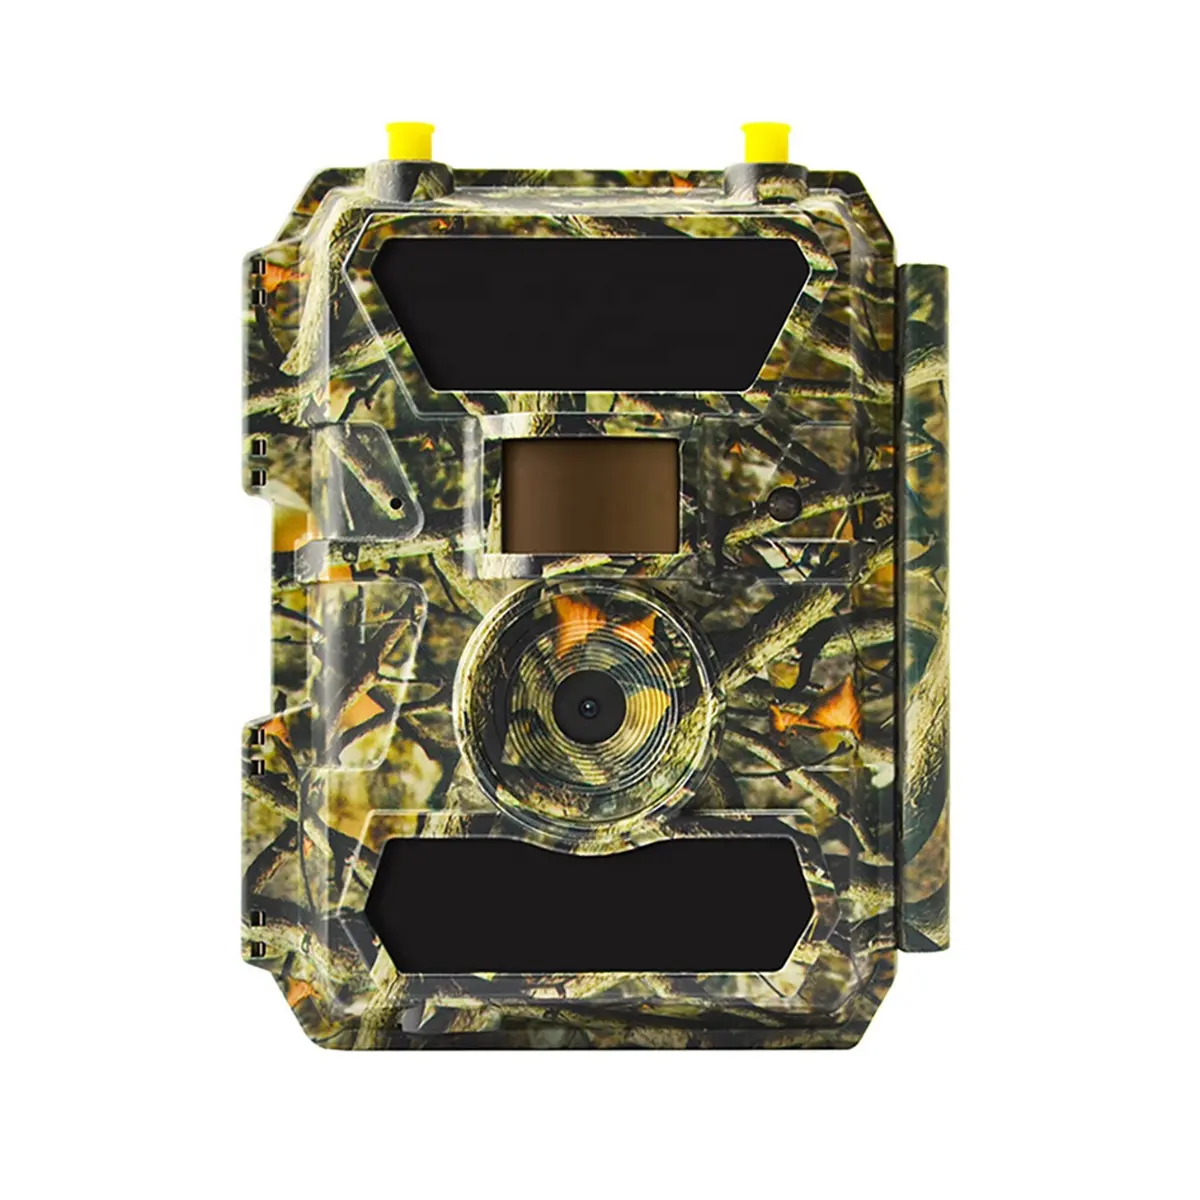 0.3S-0.4S Fast Trigger Scouting Game Camera With 2 Inch LCD Screen IP66 Waterproof Hunting Trail Cam 1080P 24 Megapixel